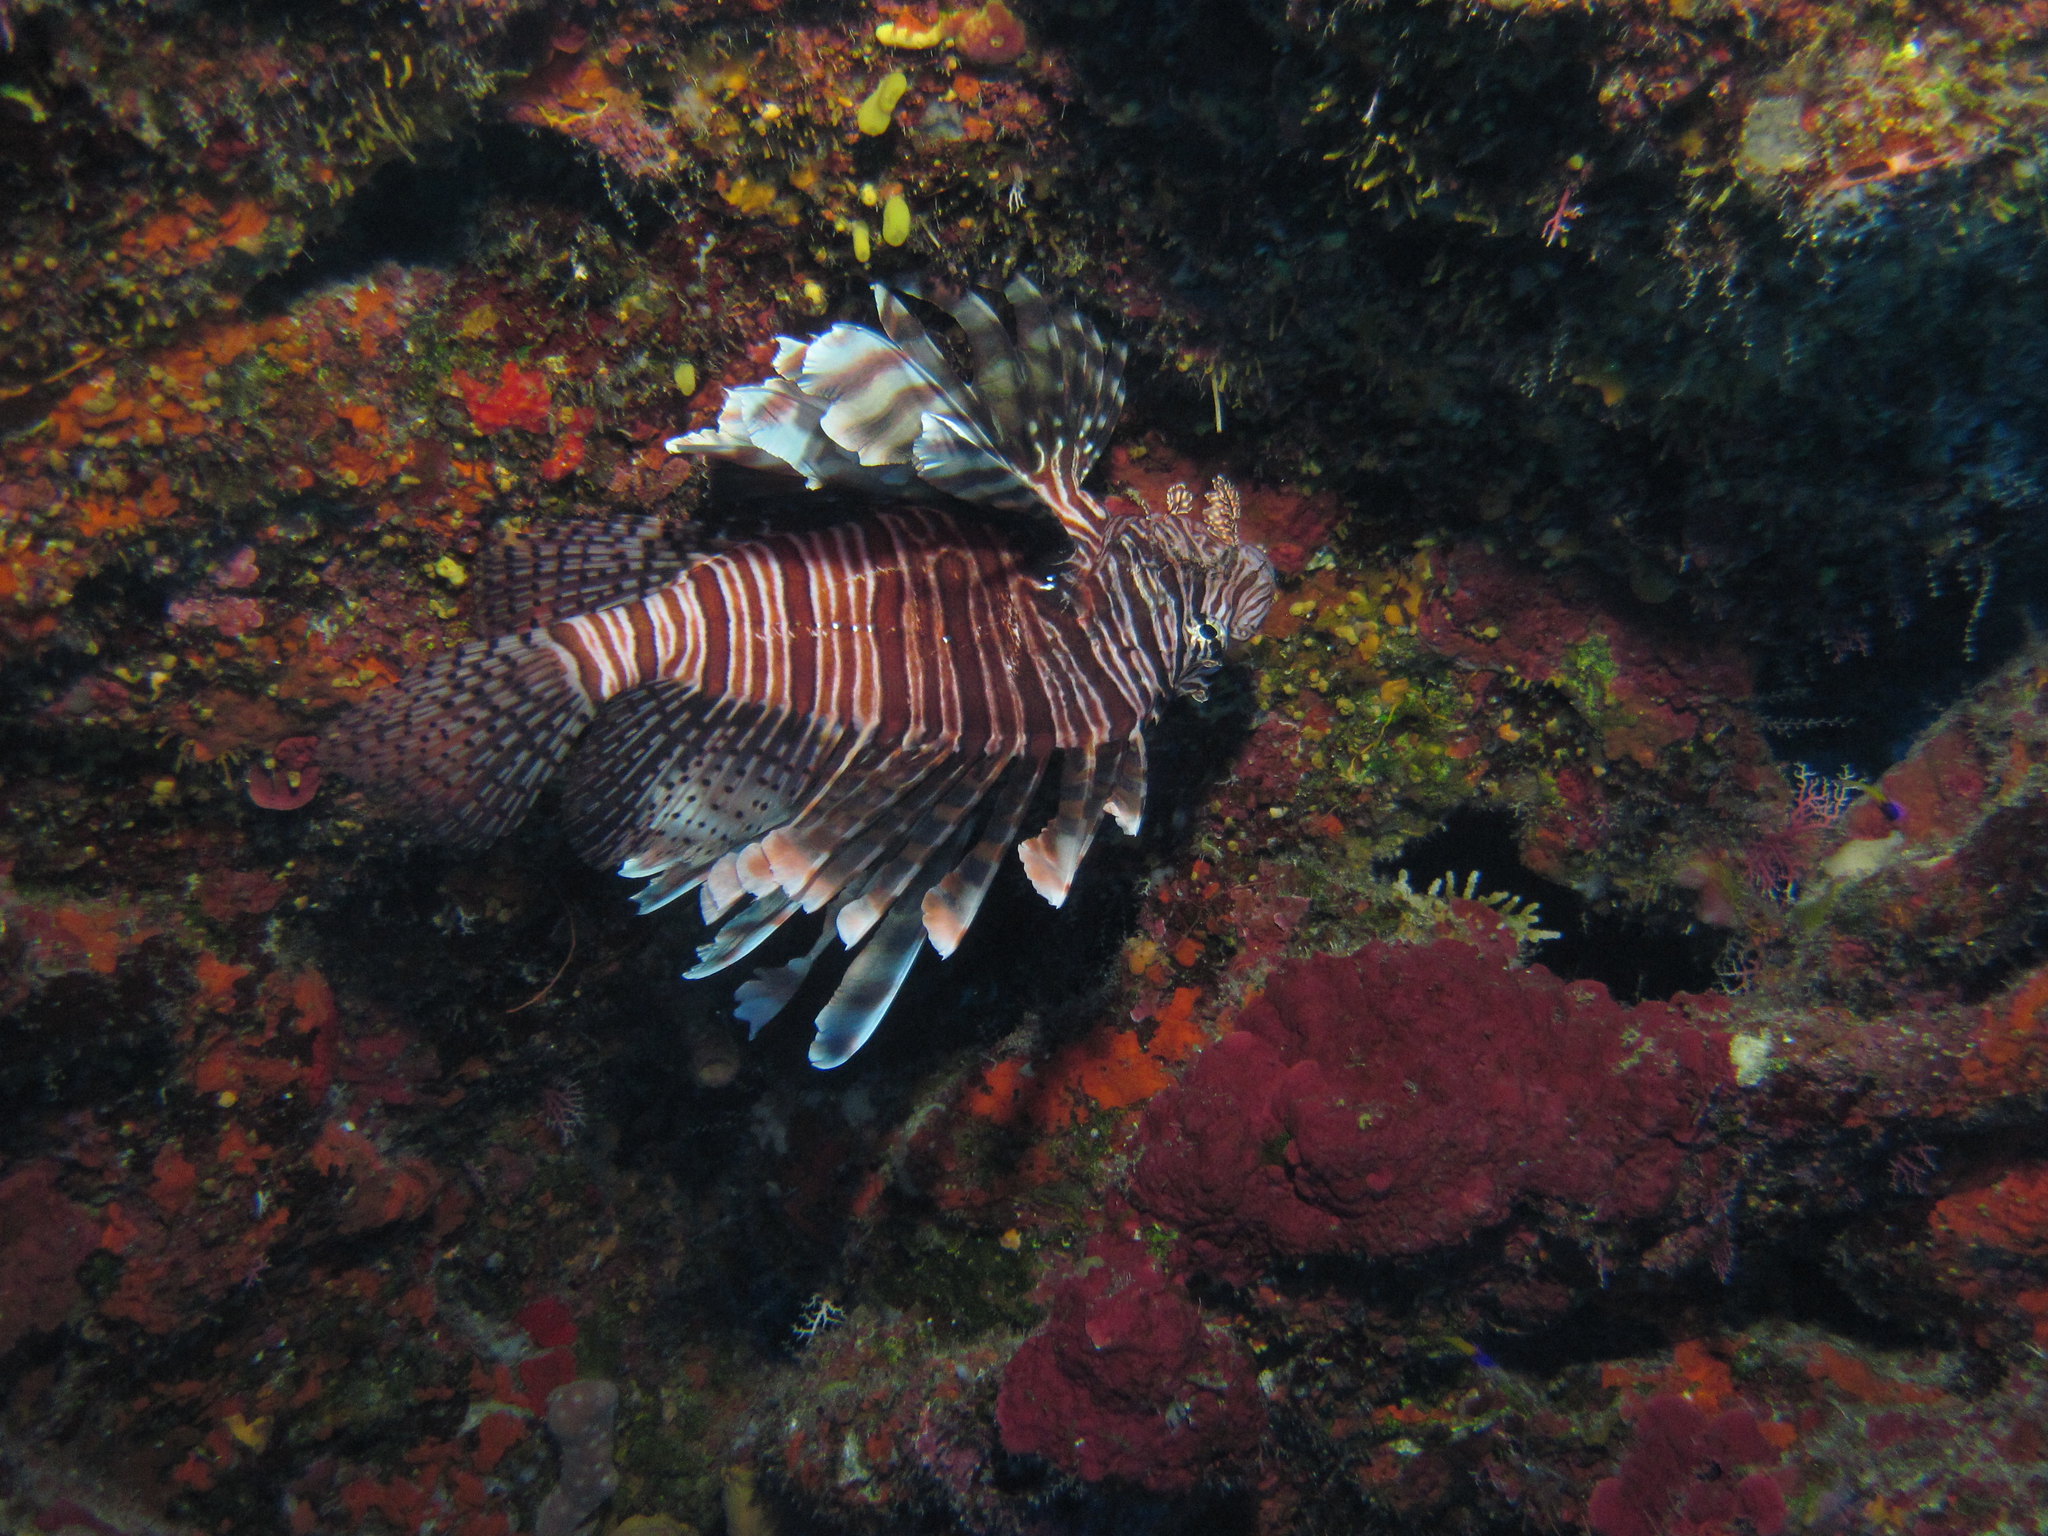 Lionfish in the Dry Tortugas